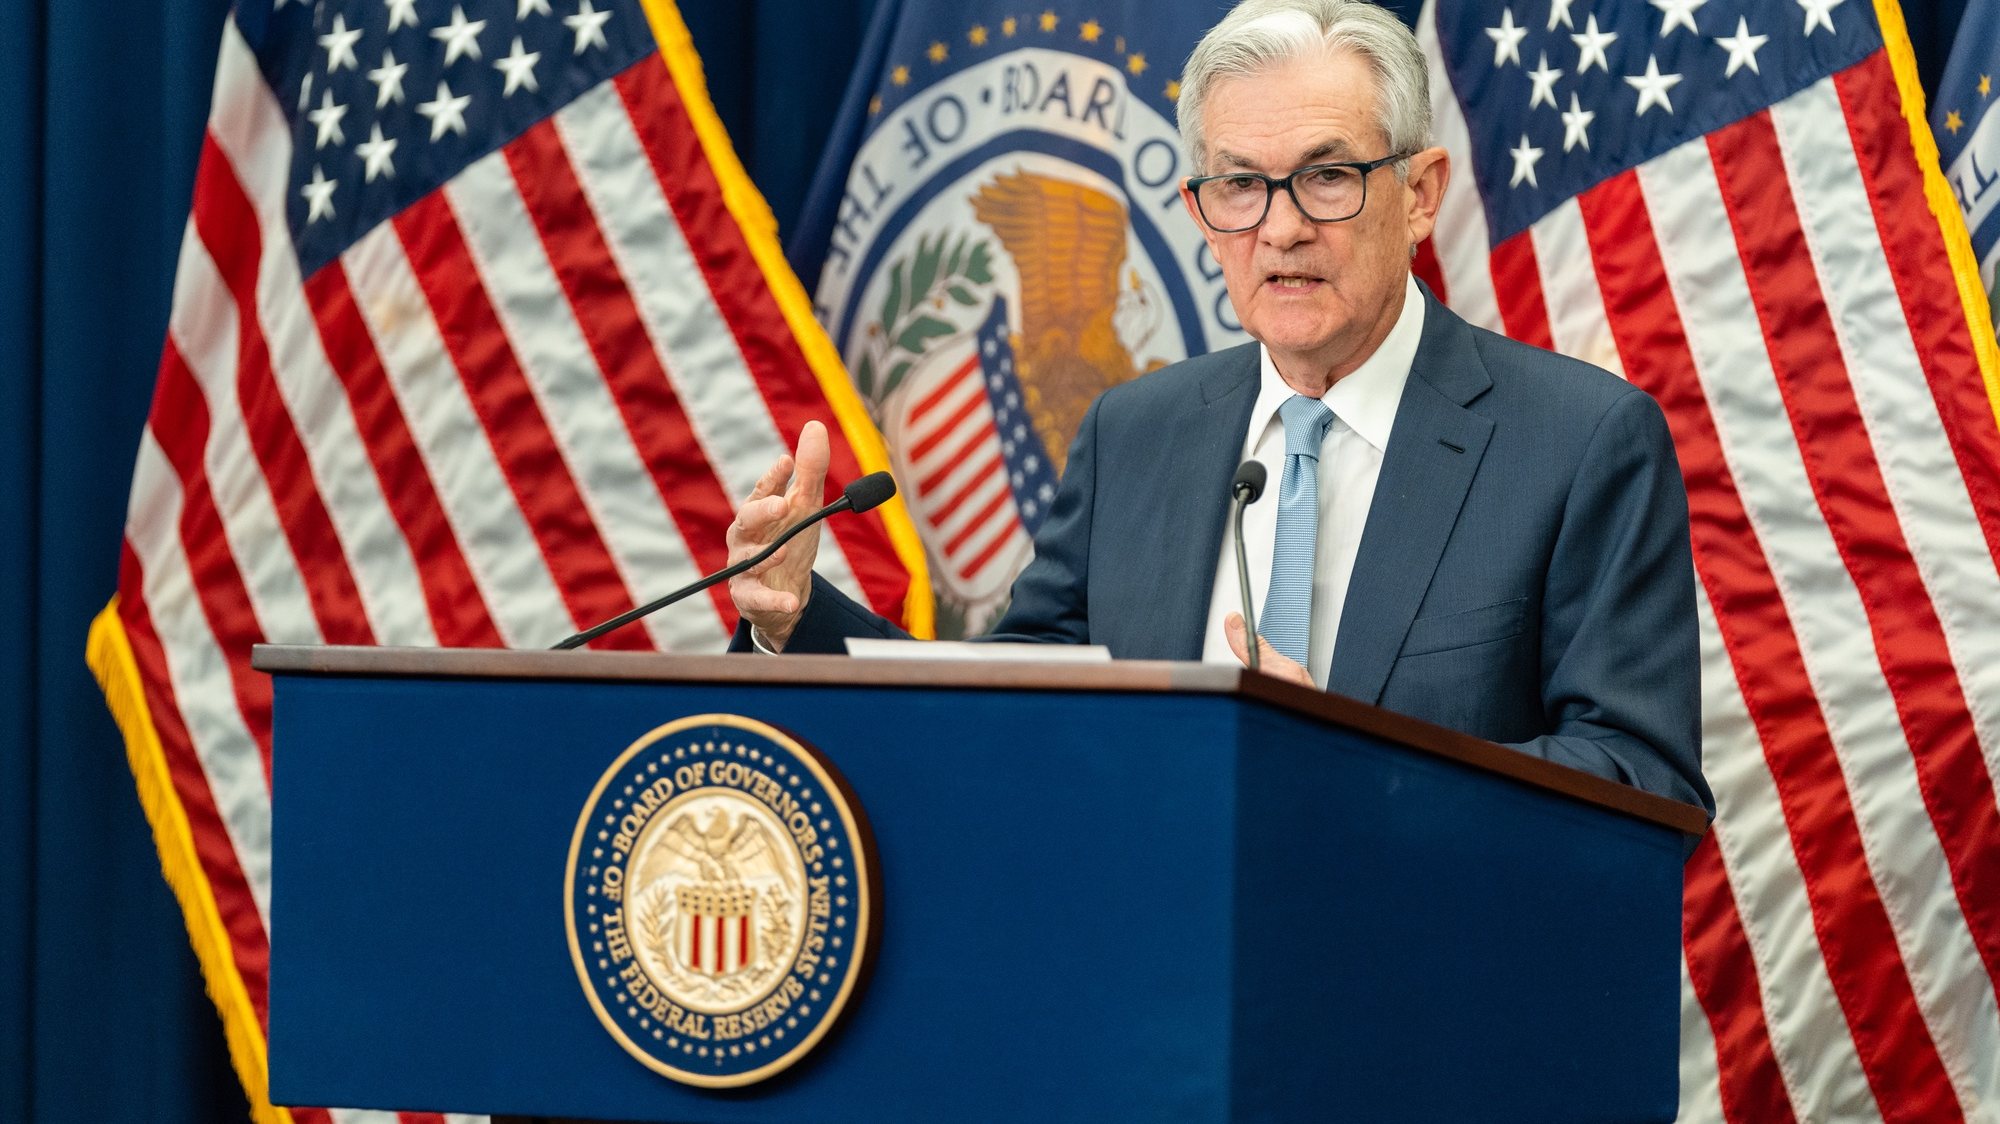 epa10366266 Chair of the Federal Reserve Jerome Powell speaks at a news conference at the William McChesney Martin Jr. Building in Washington, DC, USA, 14 December 2022. The US Federal Reserve announced plans to raise its benchmark interest rate half a percentage point, bringing the rate to highest level in 15 years as policy makers continue to try address inflation.  EPA/ERIC LEE